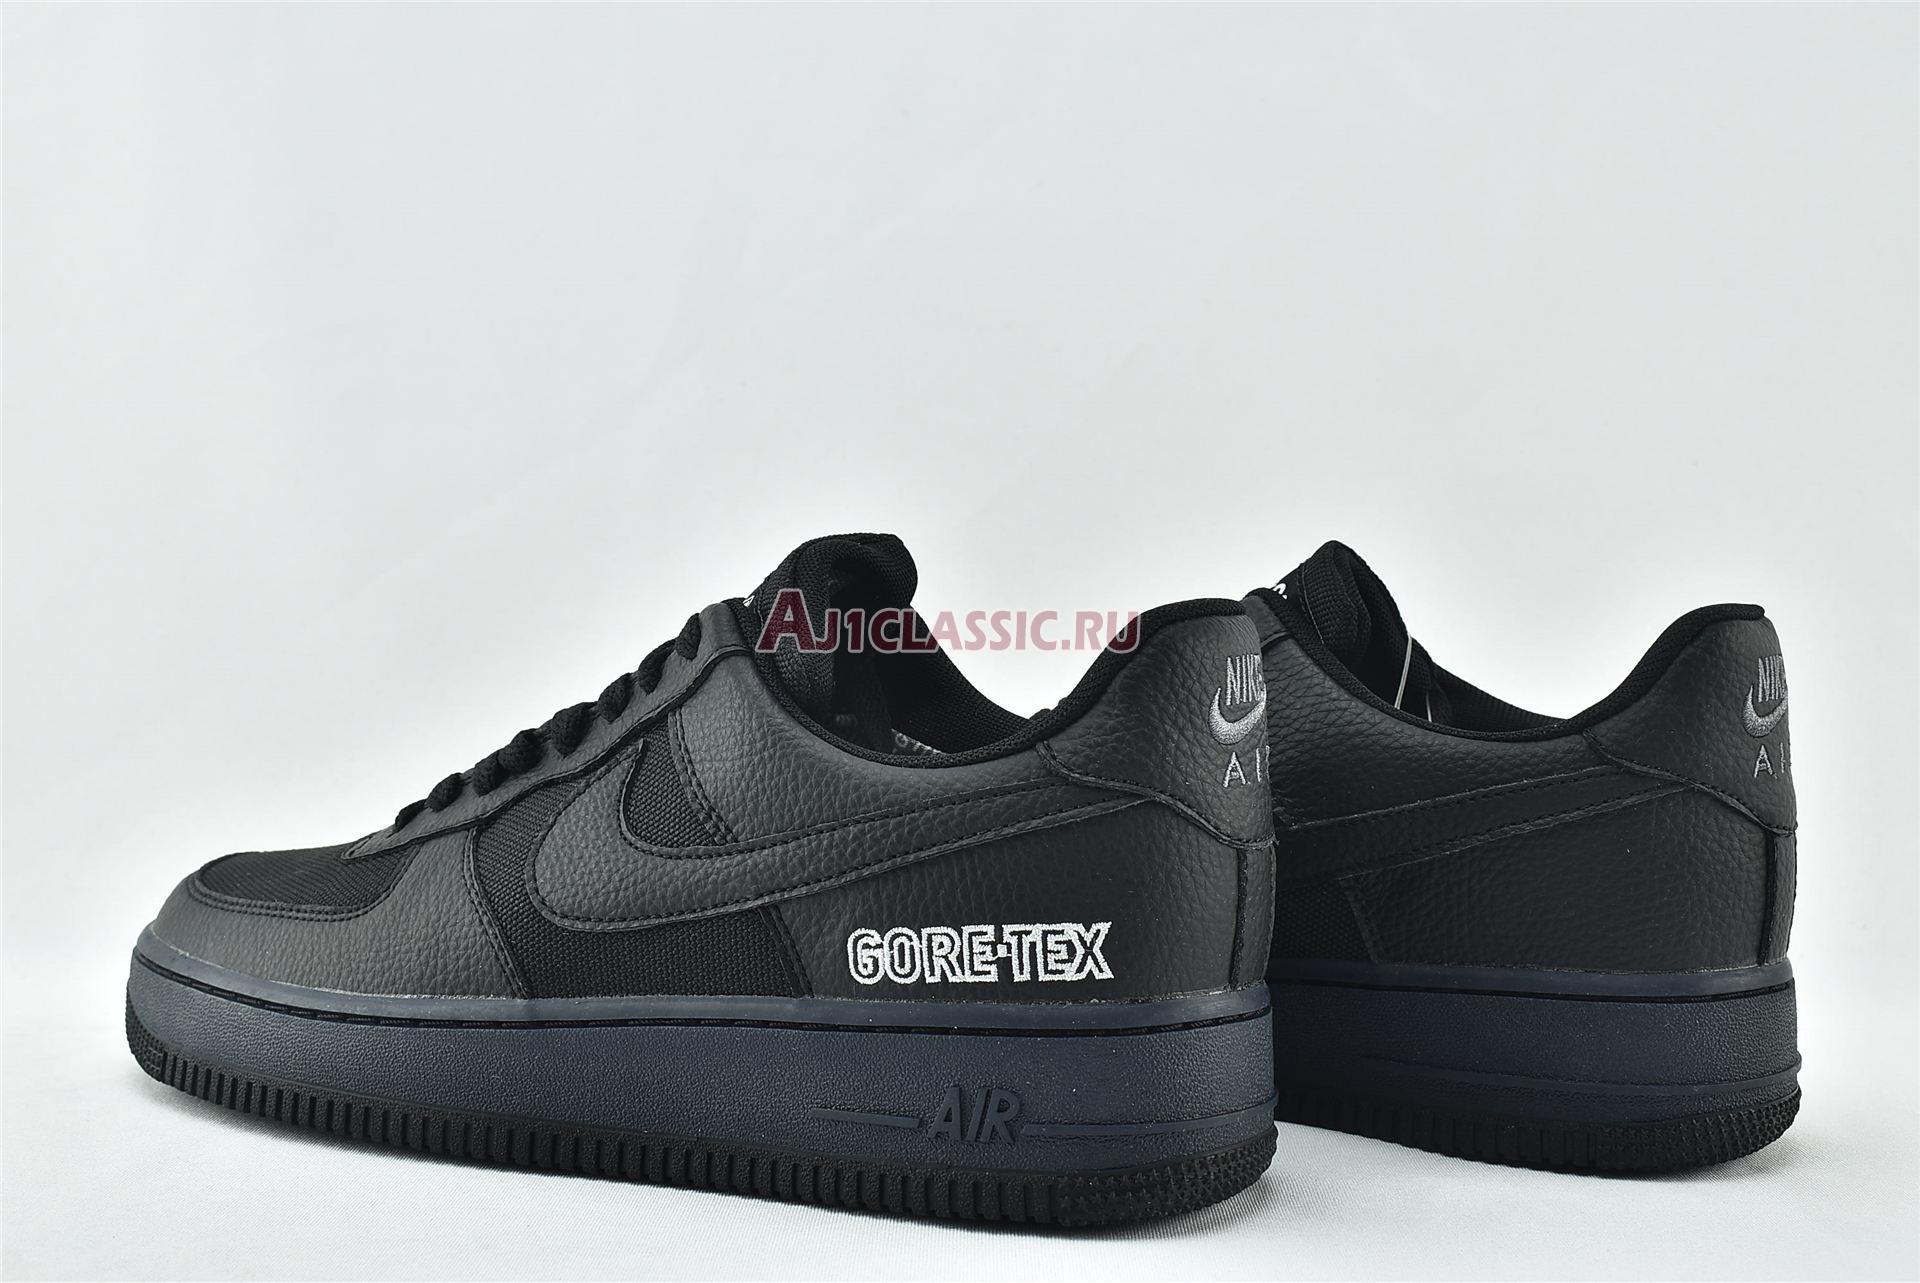 Nike Air Force 1 GTX "Anthracite Grey" CT2858-001